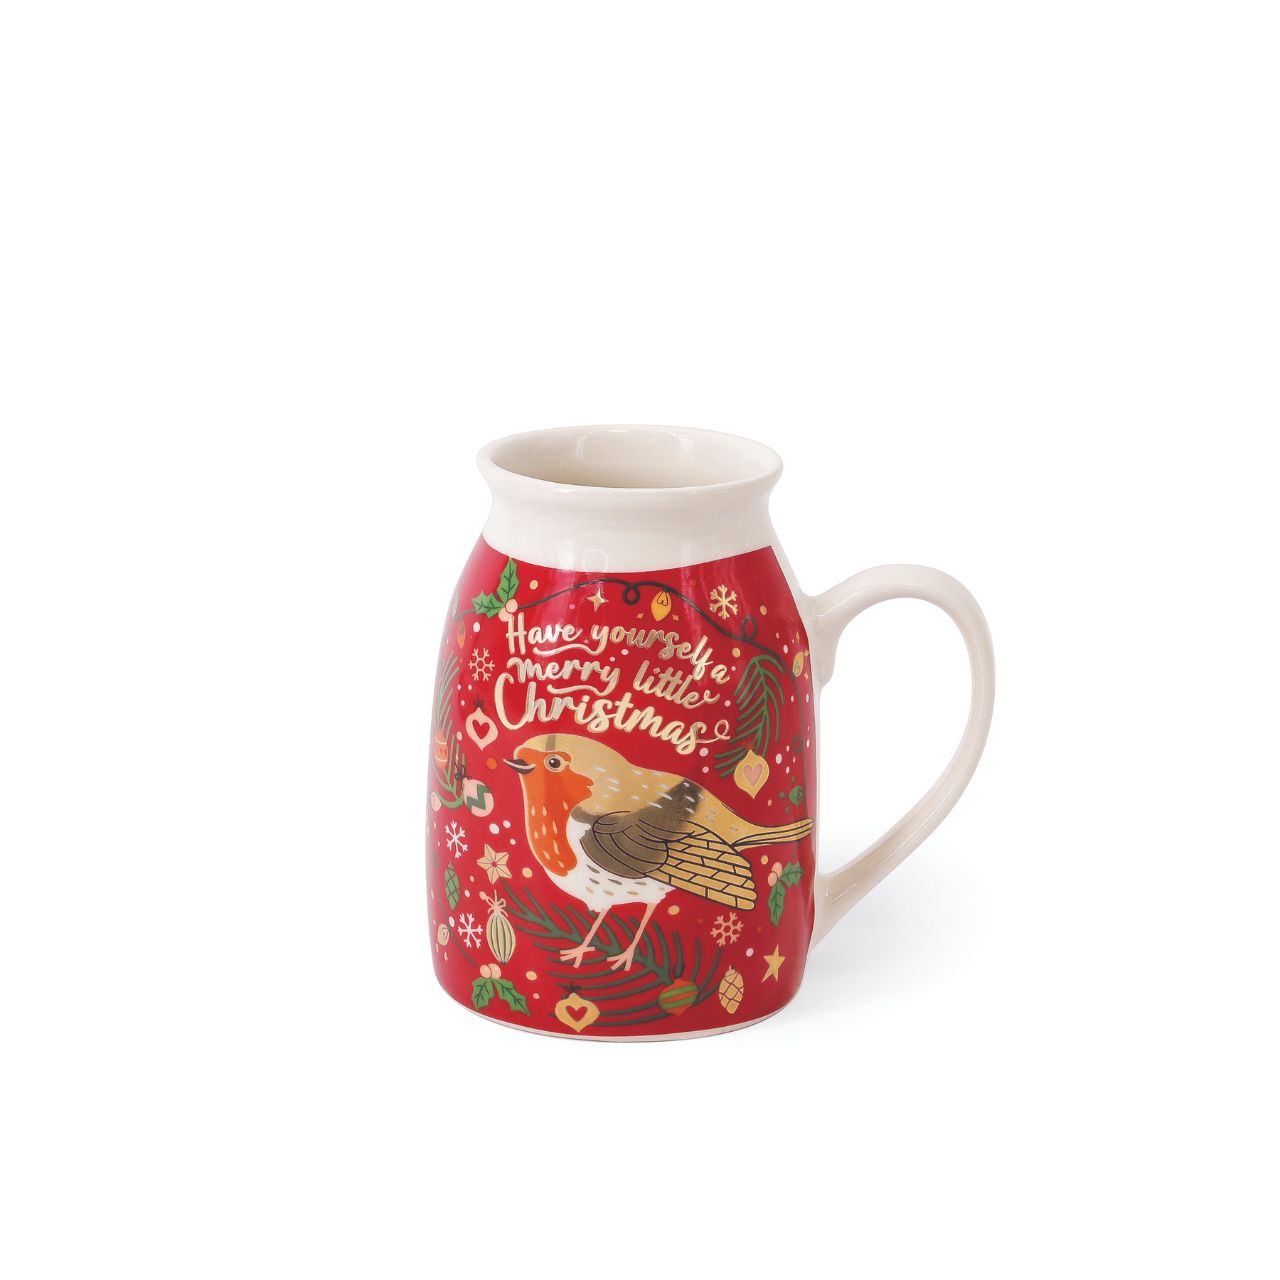 Christmas Eve Cookies Plate and Milk Set for Santa by Tipperary  Bring the magic of Christmas to your child with our special cookies plate and milk mug set. Ideal preparation, made for them to place Santa Claus’ cookies on and milk on the night before Christmas.